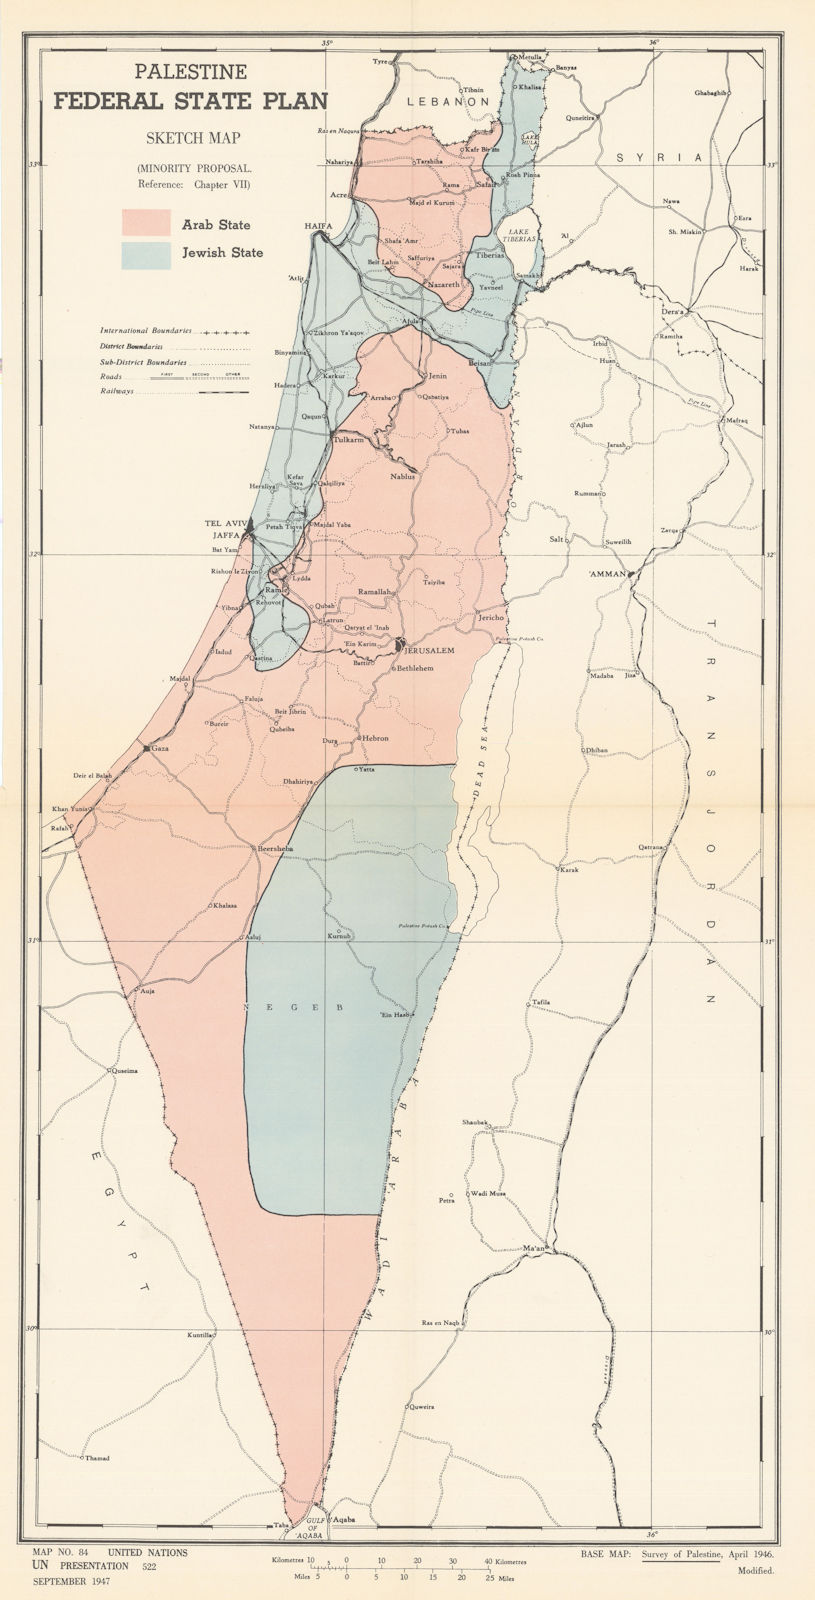 Associate Product Palestine Federal State Plan - Minority proposal. United Nations UNSCOP 1947 map